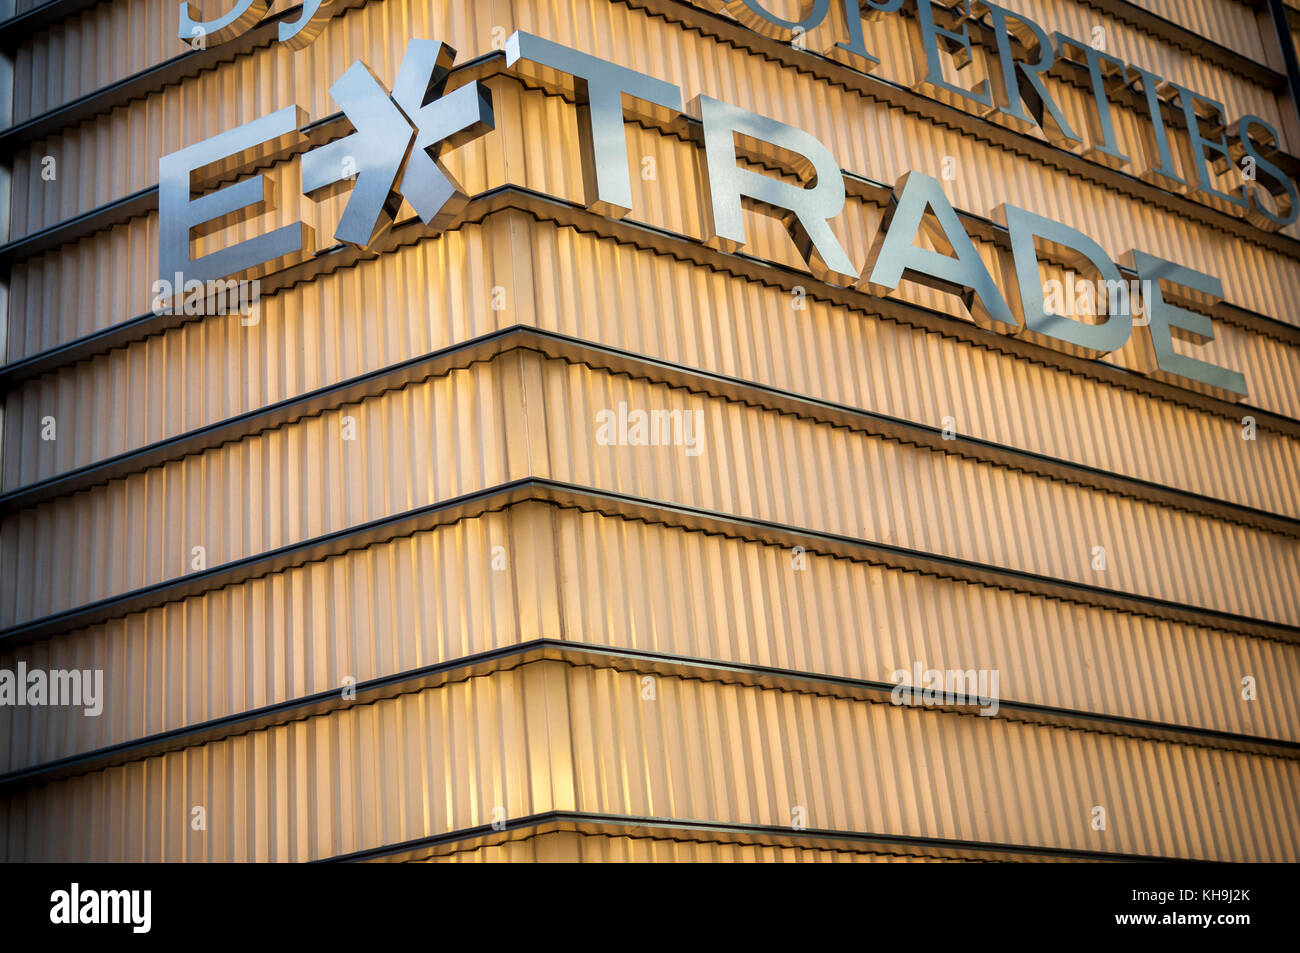 The offices of the online stock brokerage firm E*Trade in New York on Sunday, November 12, 2017. E*Trade recently purchased the Trust Company of America to bolster its financial advisory offerings. (© Richard B. Levine) Stock Photo